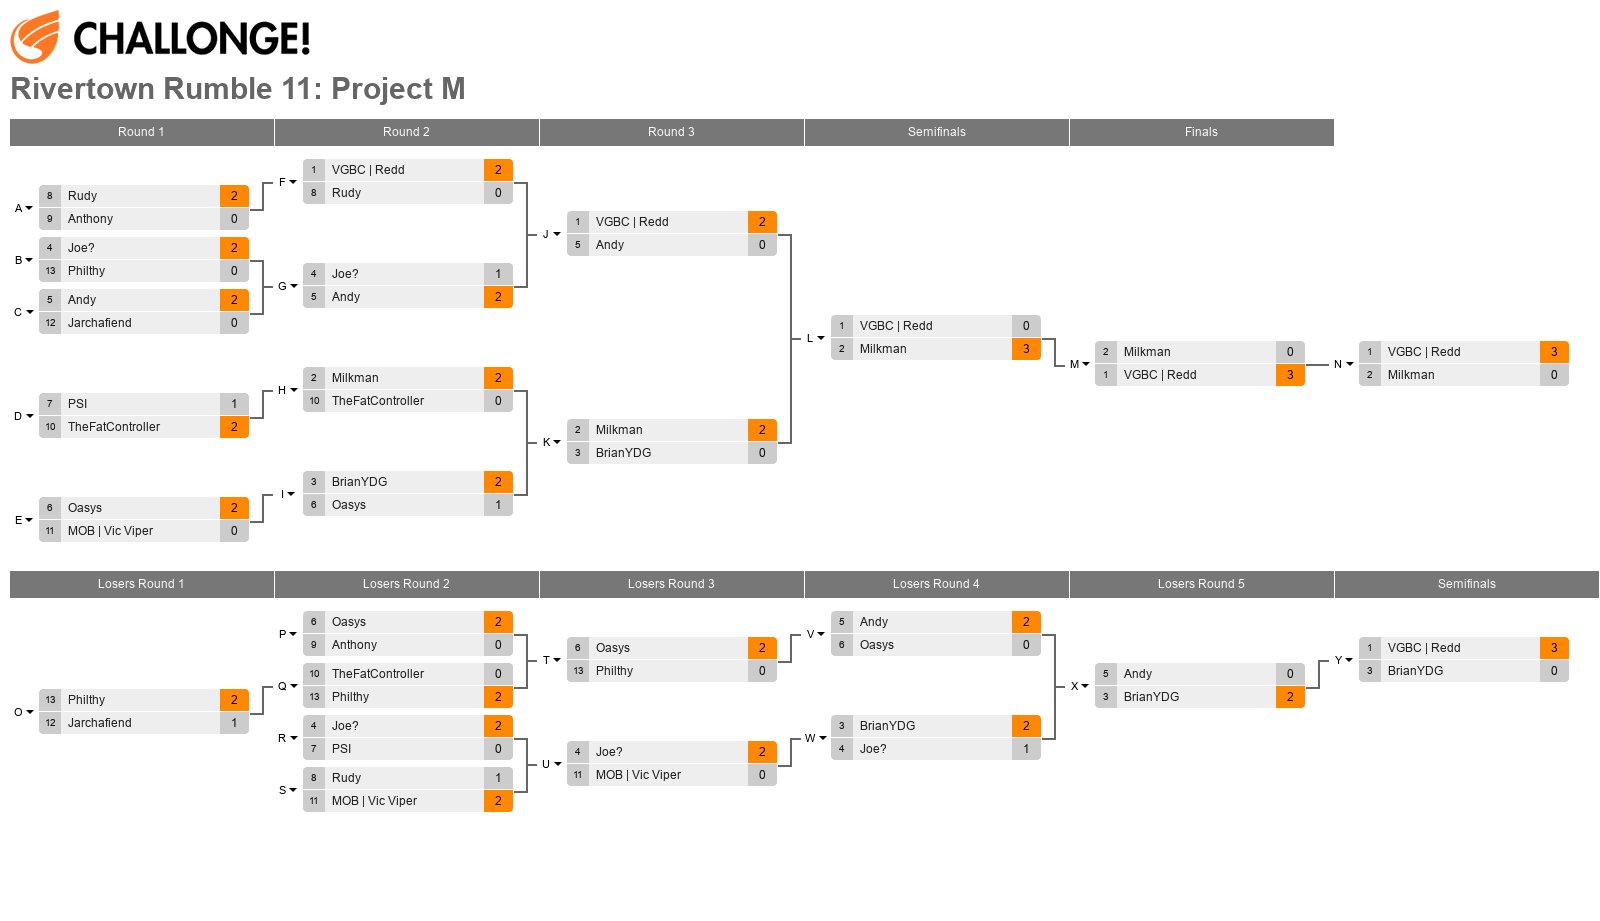 Rivertown Rumble 11: Project M